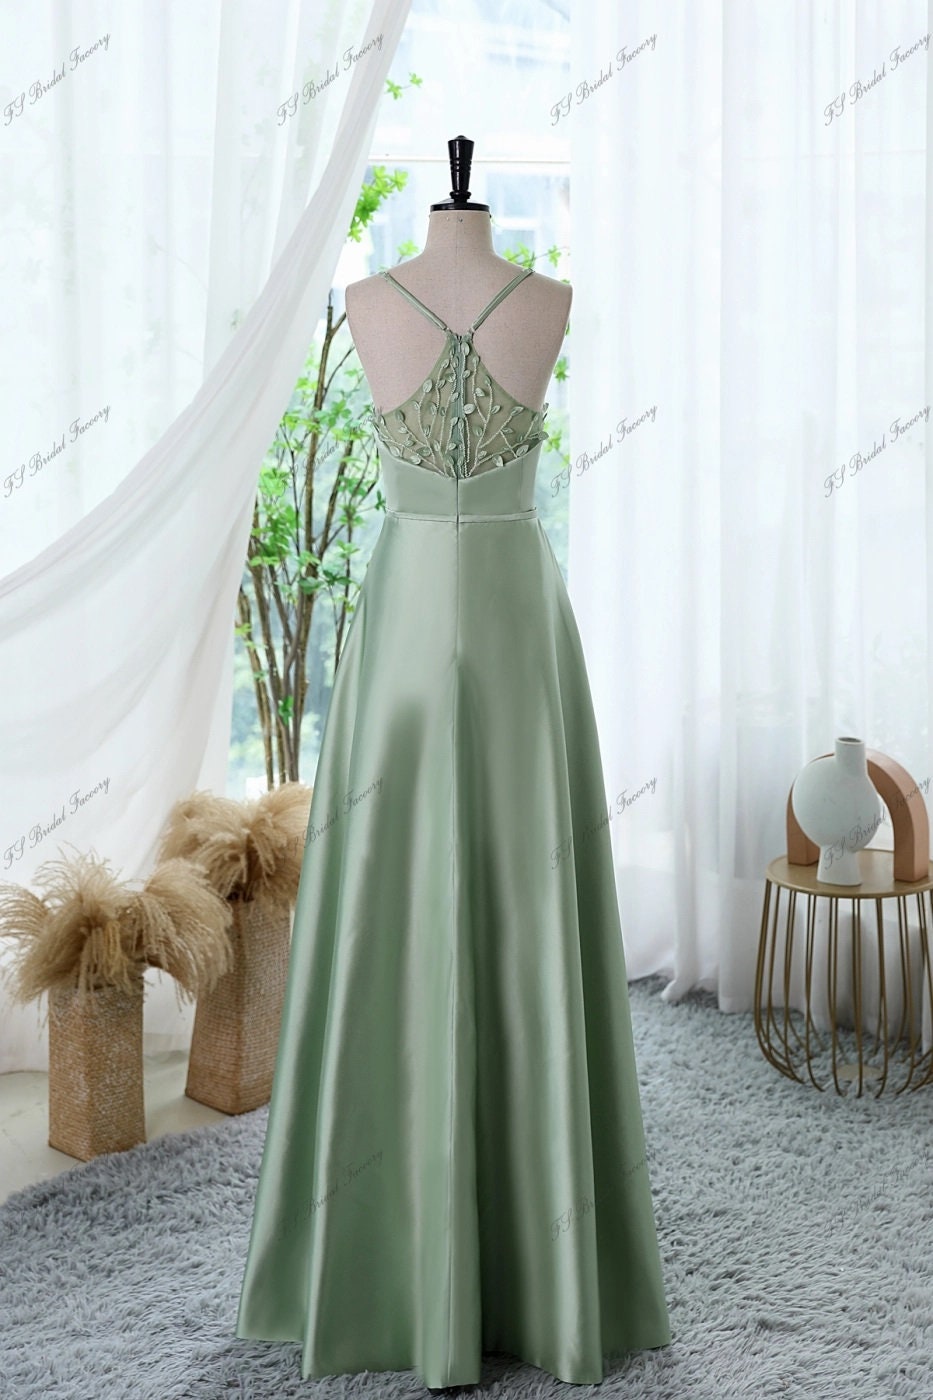 Soft Satin Bridesmaid Dress with Lace 3-D Leaves Illusion Back Slight V Front Sleeveless with Straps Floor Length Formal Dress Gala